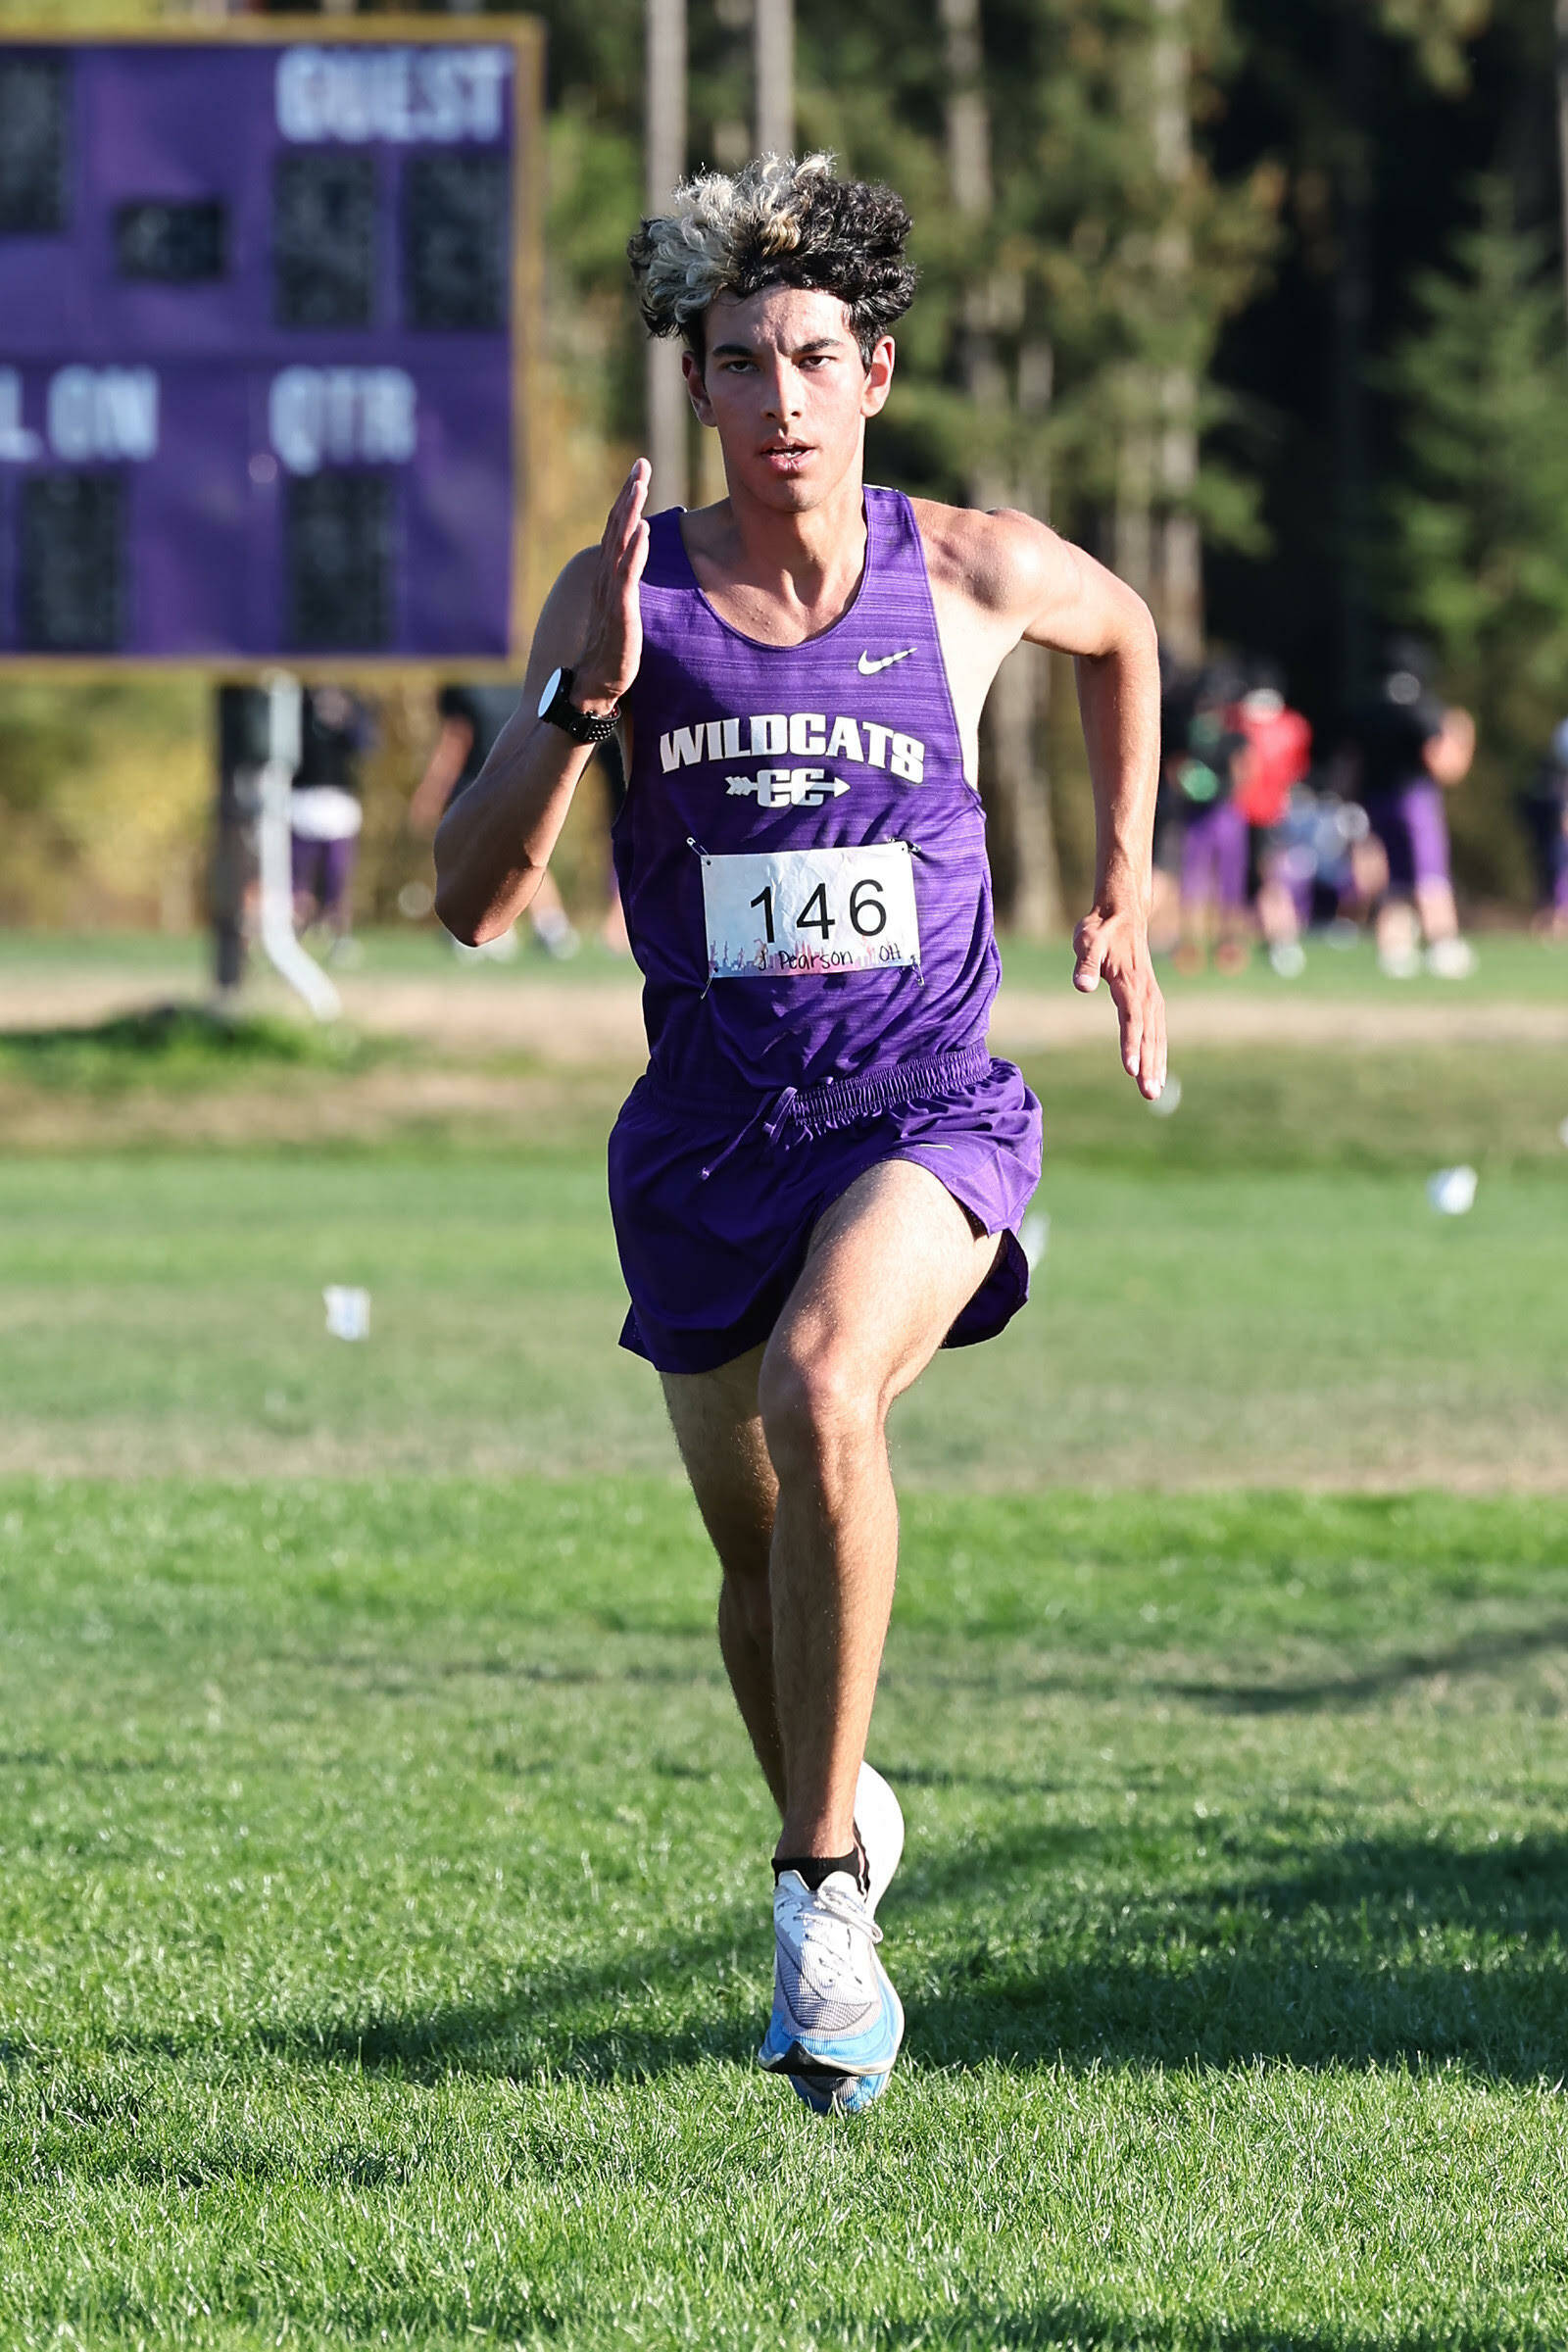 Photo by John Fisken
Oak Harbor’s Jacob Pearson placed first in the 5,000 meters boys varsity race with a time 16:39.